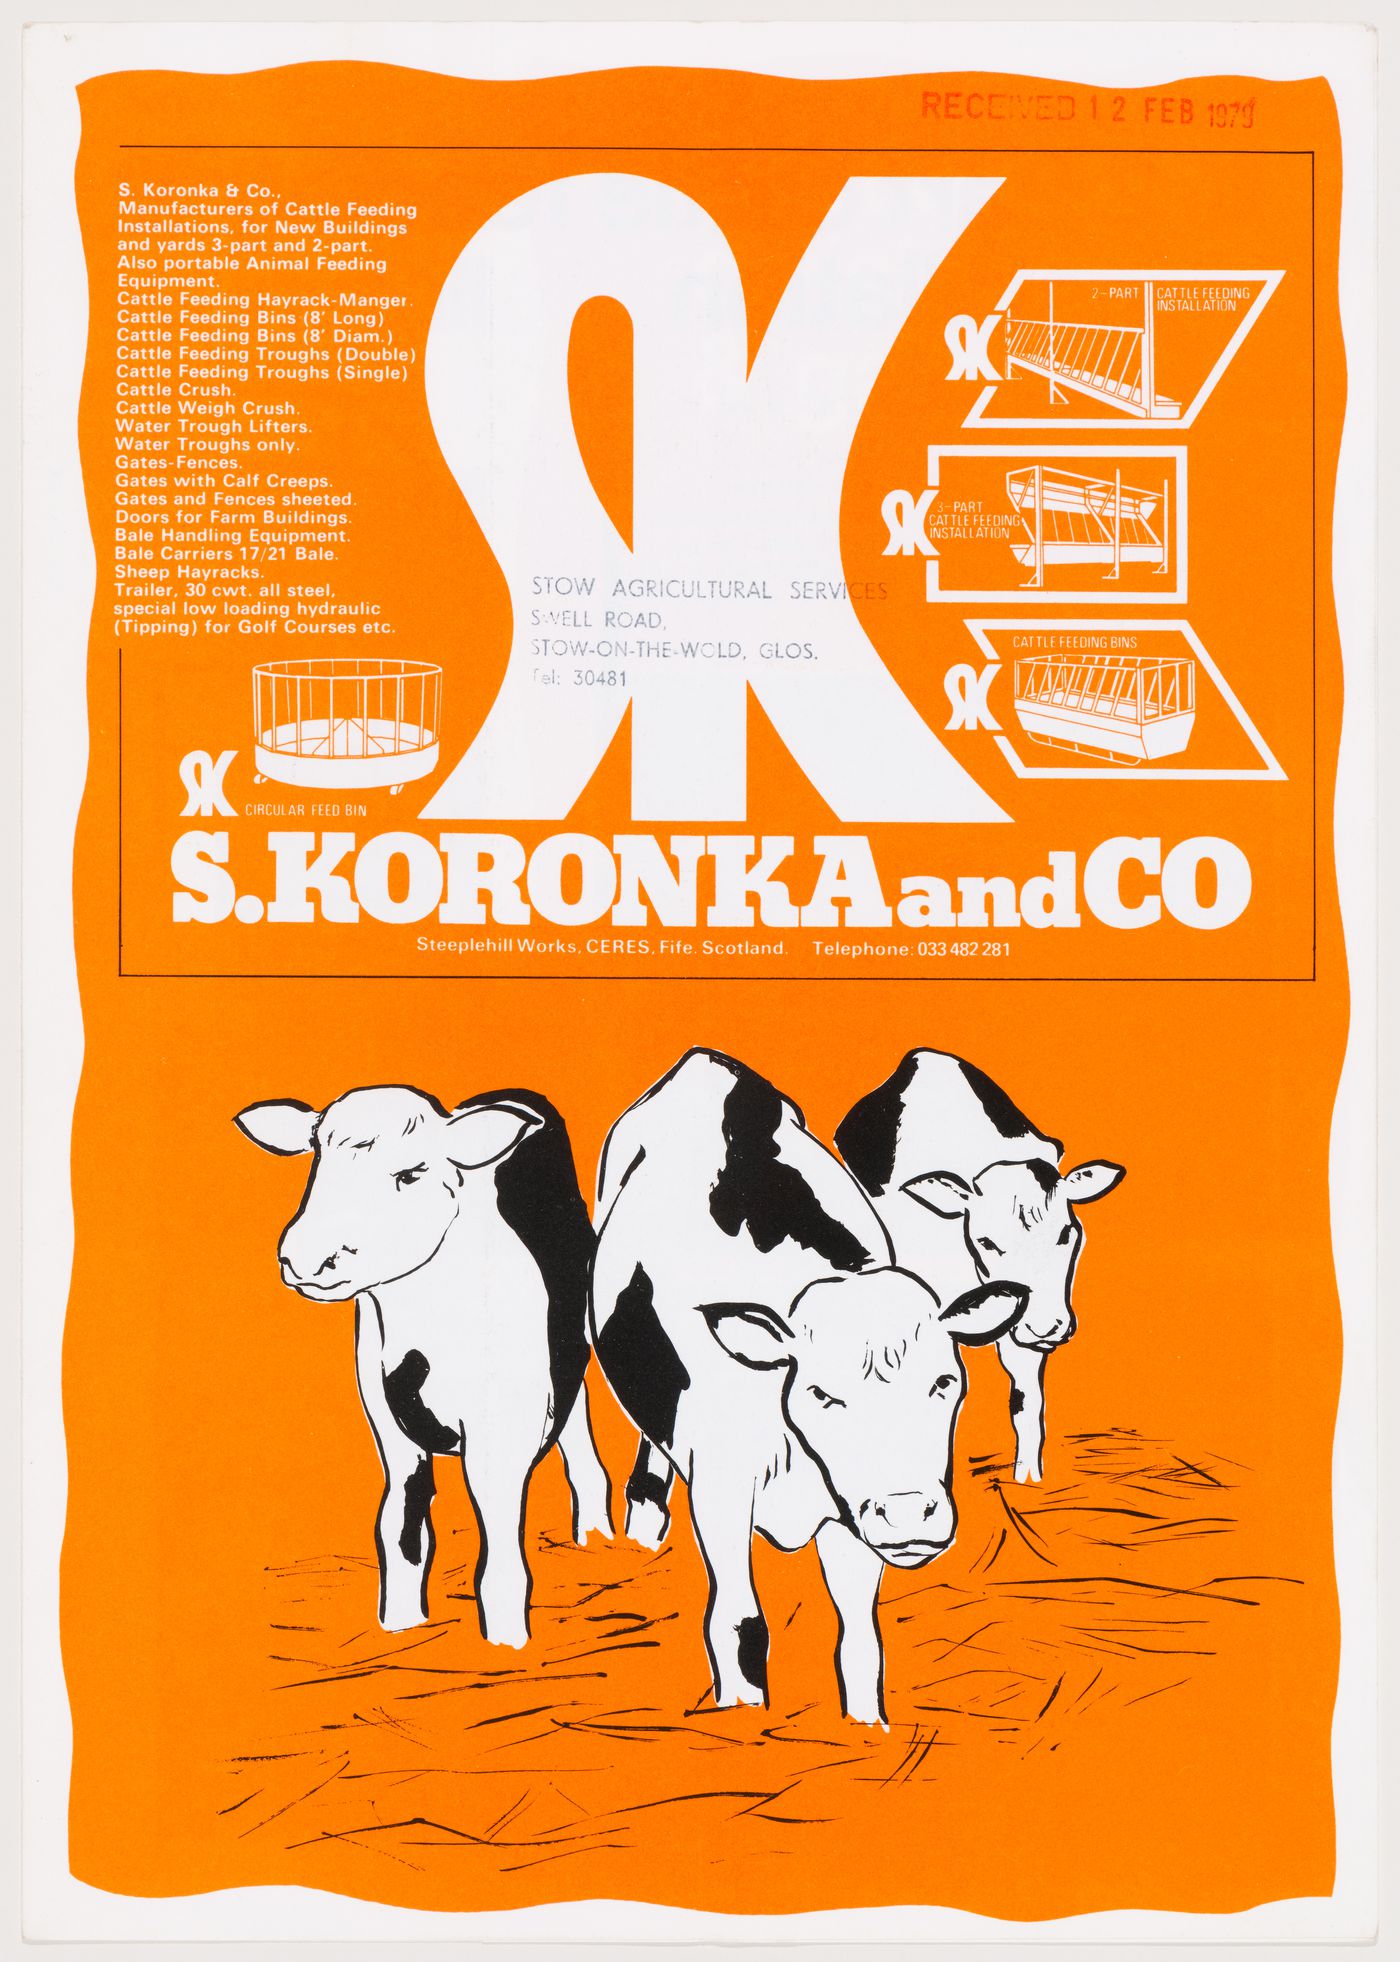 Advertisement for animal feeding equipment manufactured by S. Koronka and Co., from the project file "Westpen"